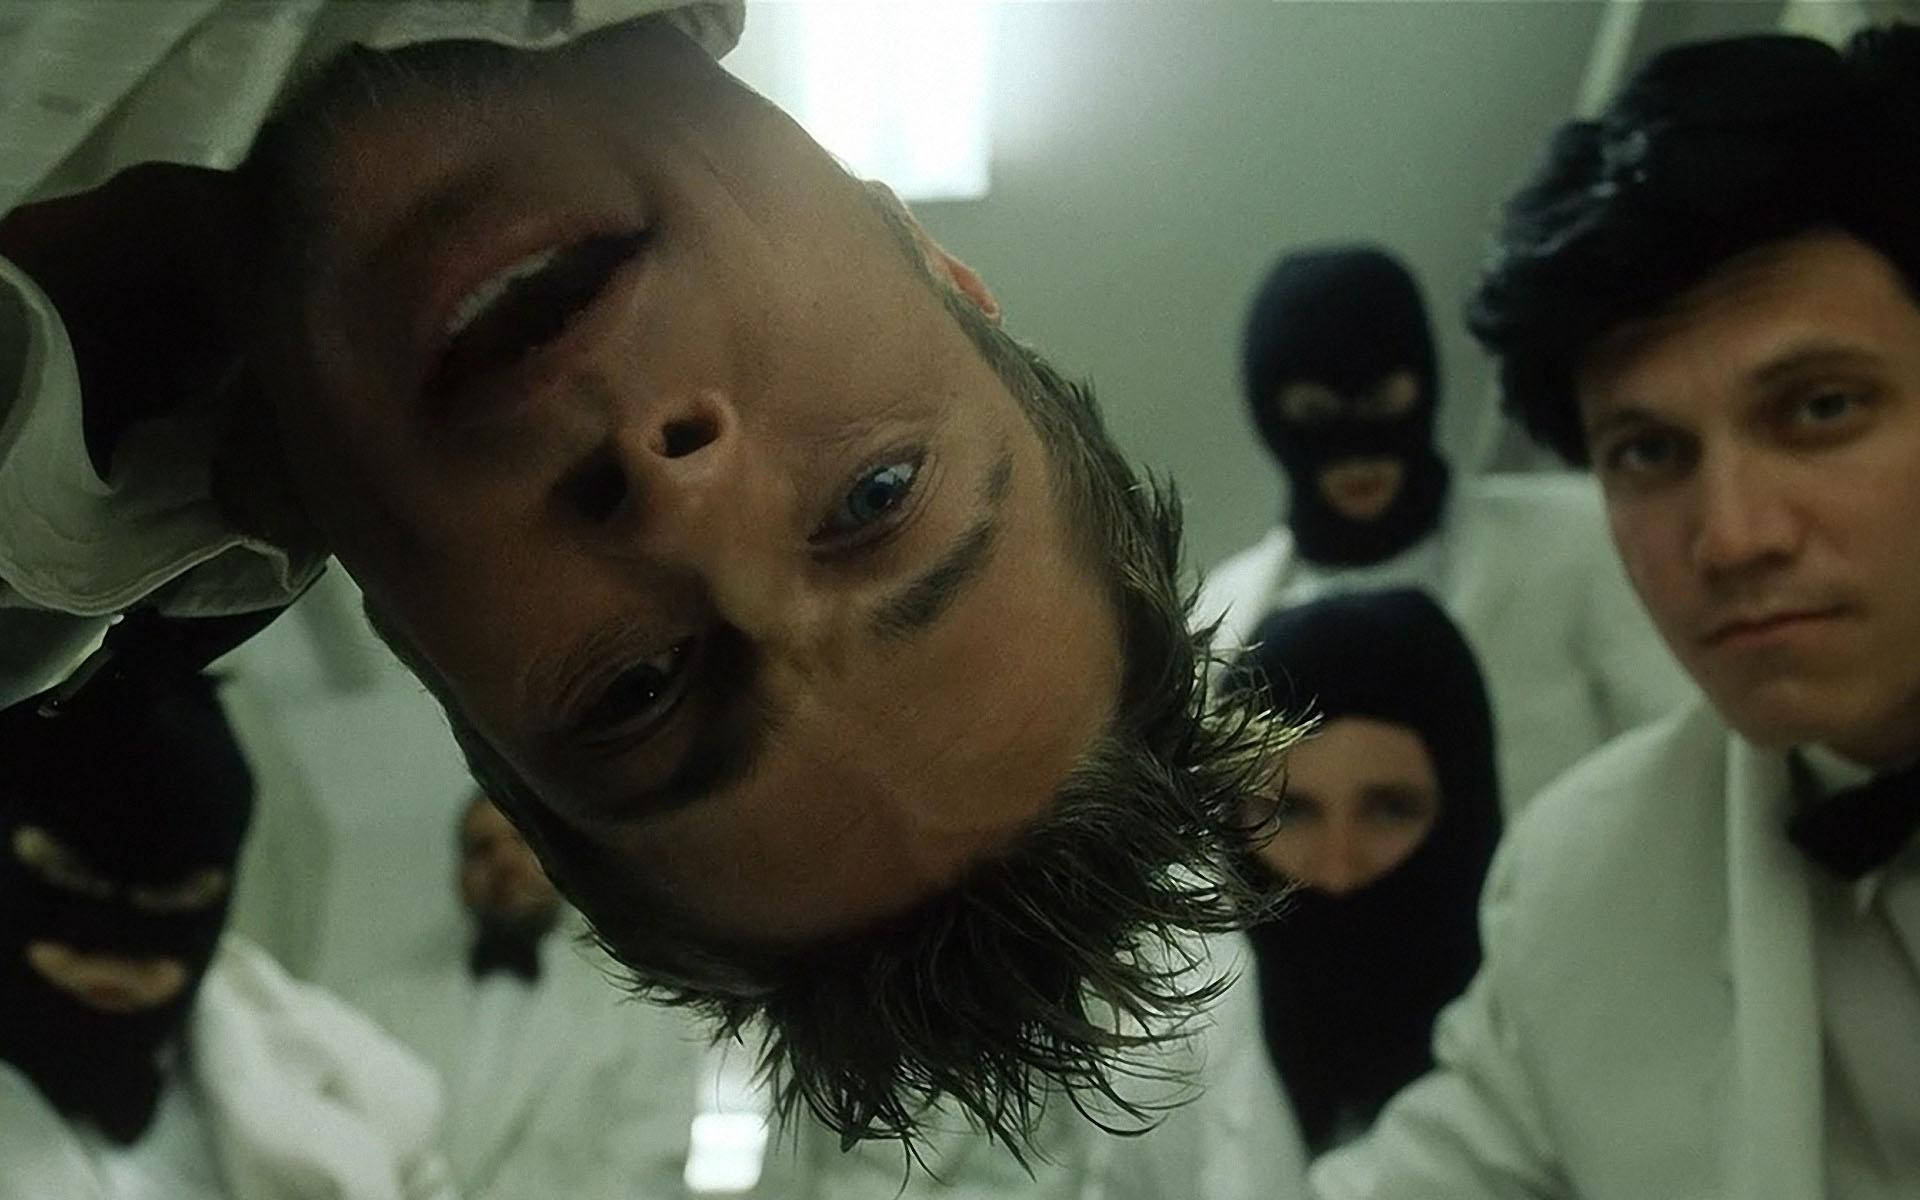 <p><em>Fight Club</em>, directed by David Fincher, offers a fascinating case study of a film that started as a cult classic and eventually infiltrated the mainstream while profoundly influencing modern cinema and its audience. Upon its release in 1999, the film didn't resonate with mainstream audiences, and it initially struggled at the box office. However, its complex narrative, bold themes, and unforgettable performances by Edward Norton and Brad Pitt gradually attracted a fervent cult following. Over time, "Fight Club" not only found its place in the pantheon of cult classics but also entered the collective consciousness of moviegoers worldwide. Its critique of consumerism, identity, and masculinity, delivered through a gritty and visually striking narrative, paved the way for a new wave of thought-provoking cinema. Its enigmatic ending, memorable quotes, and anti-establishment ethos have left an indelible mark on pop culture, with fans passionately dissecting its themes and hidden messages.</p>